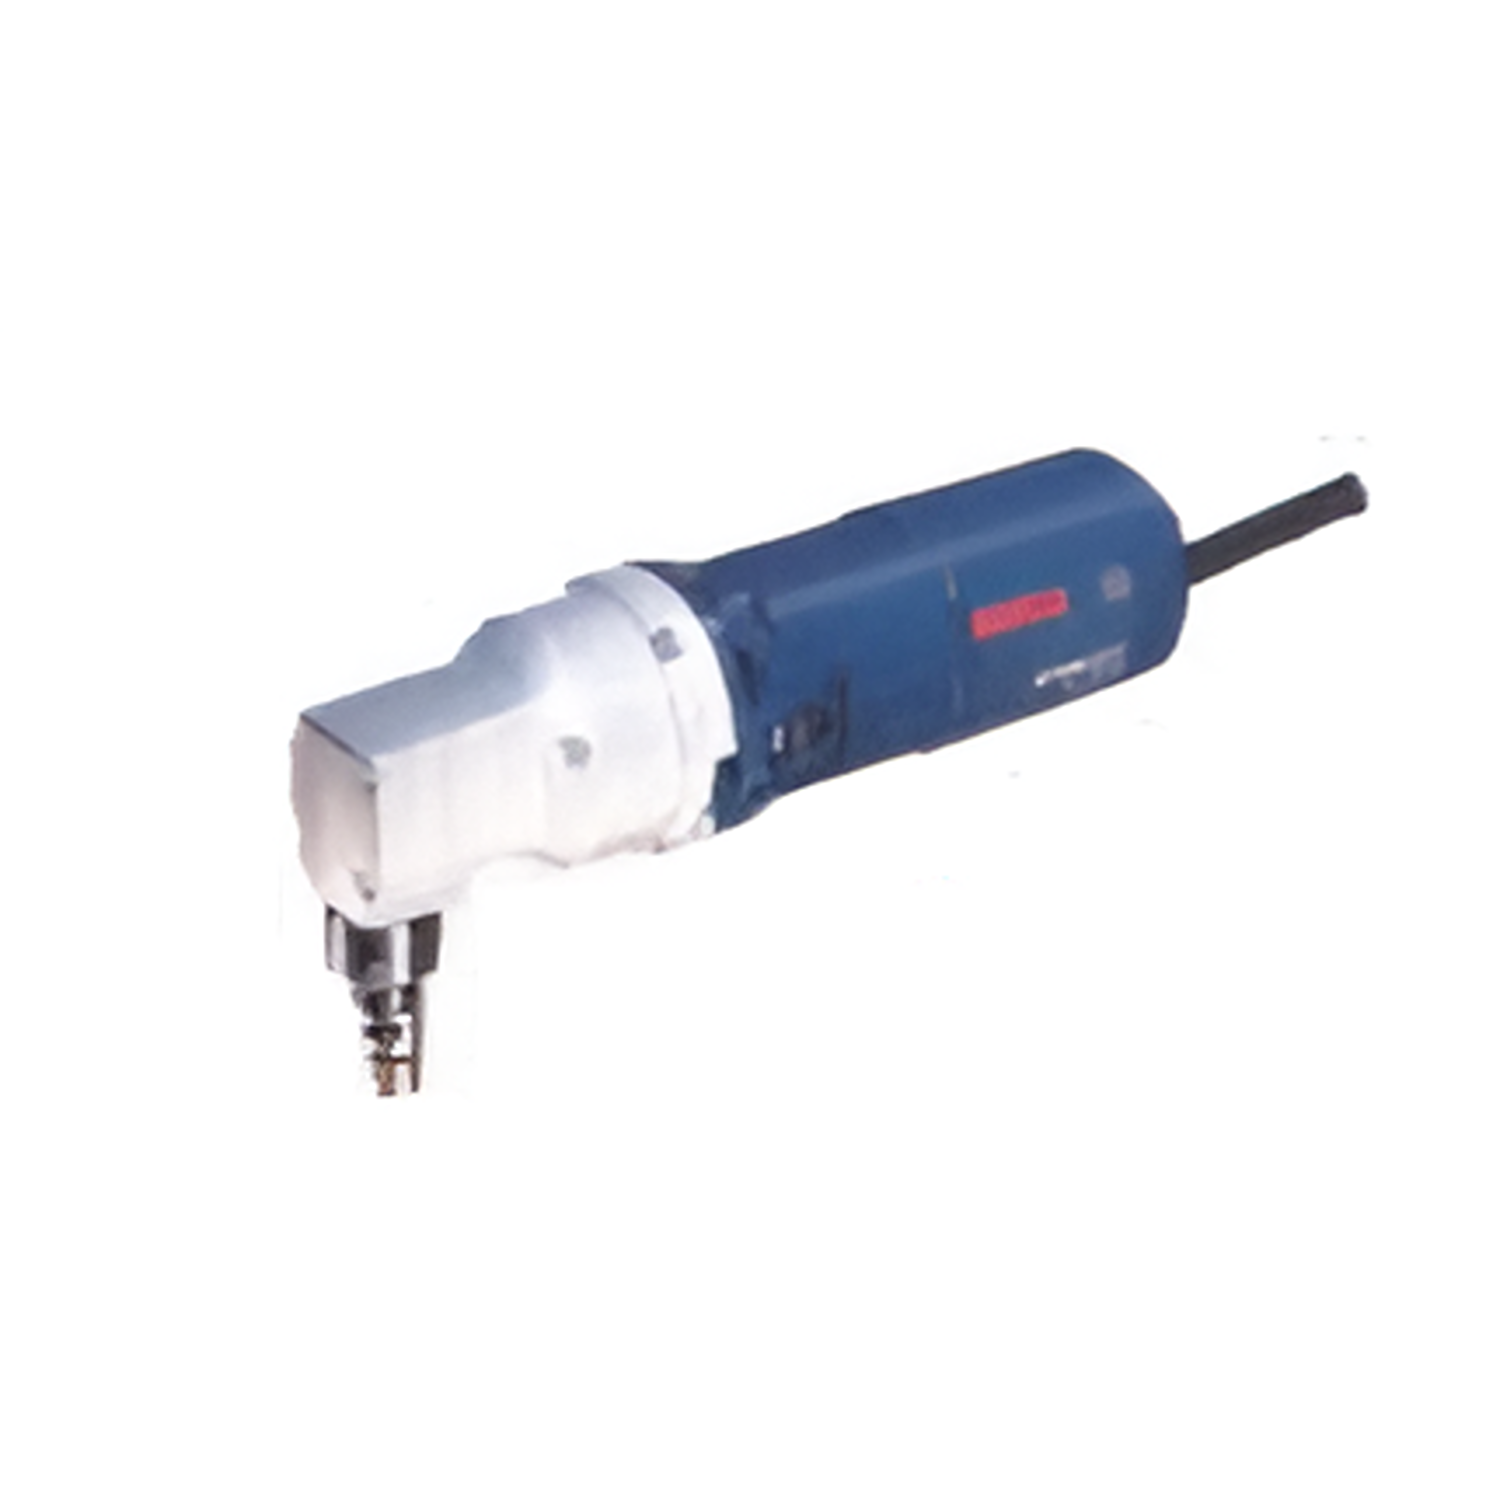 YEW AIK AC00410 Nibbler Power Tools GNA 2.0 - Premium Power Tools from YEW AIK - Shop now at Yew Aik.